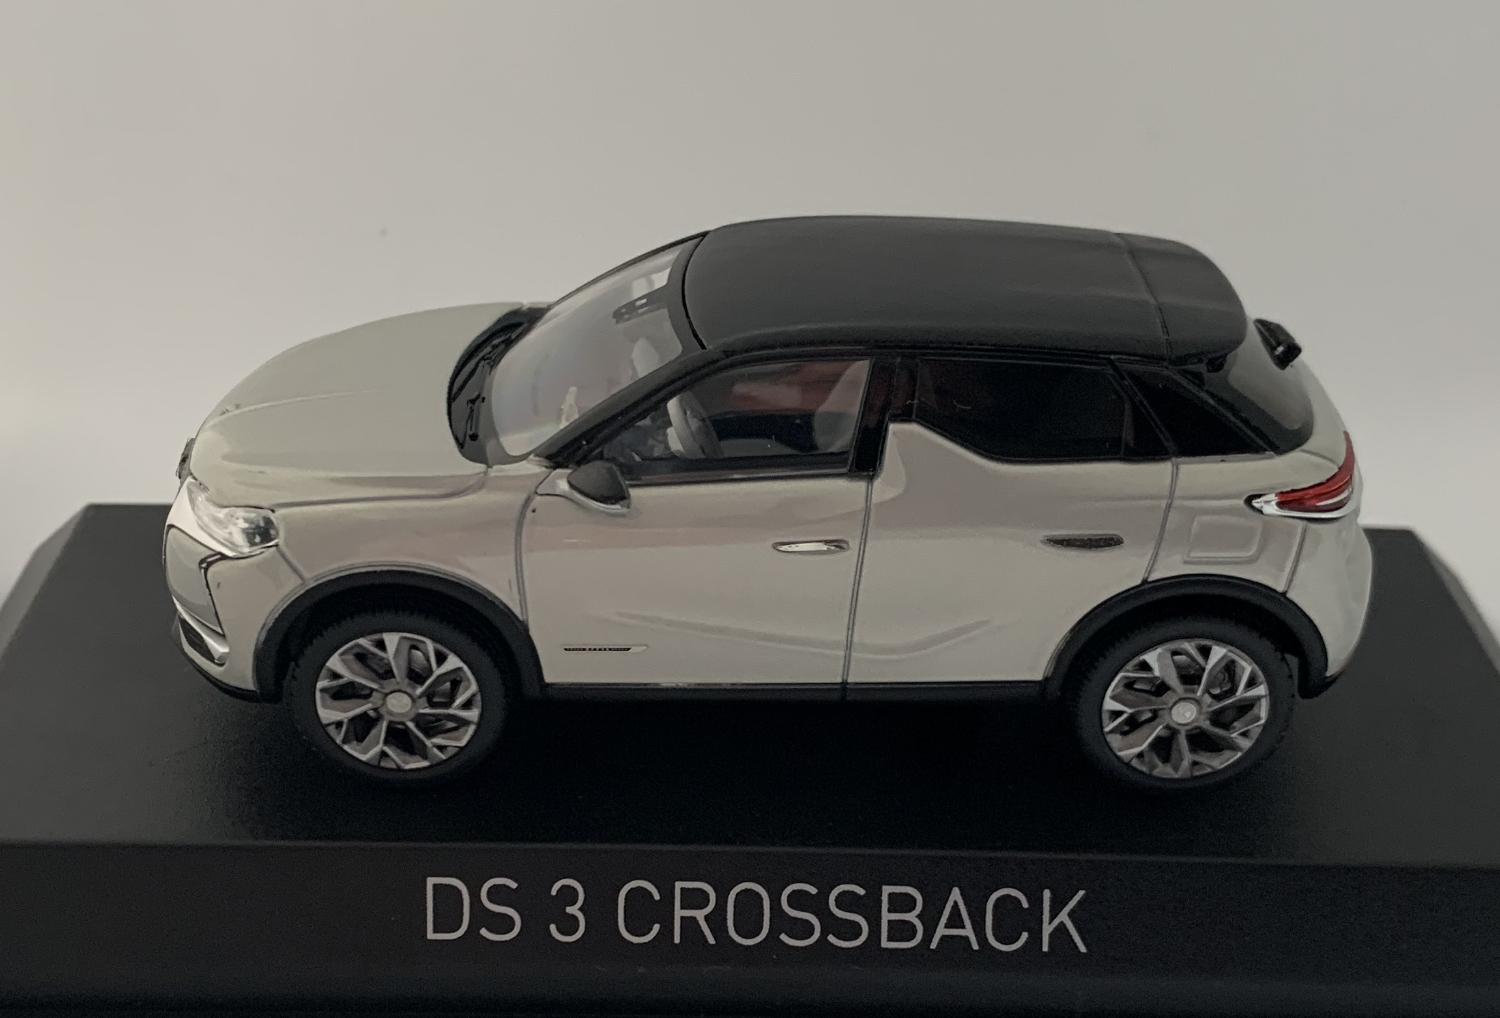 DS 3 Crossback E-Tense 2019 in pearl 1:43 scale model from Norev